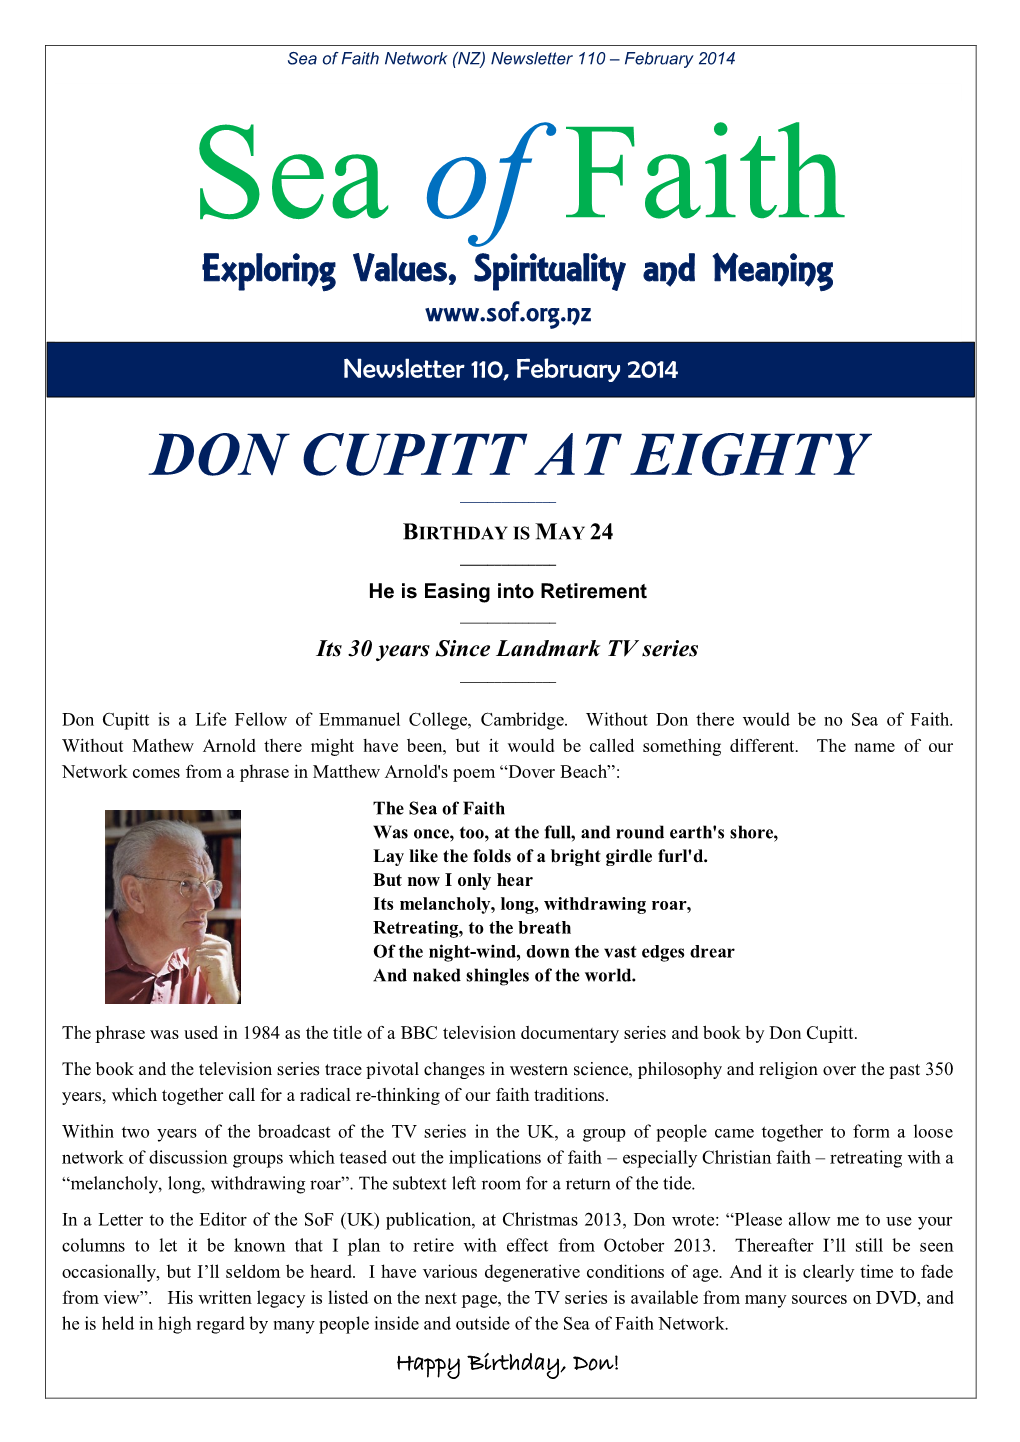 Don Cupitt at Eighty ______Birthday Is May 24 ______